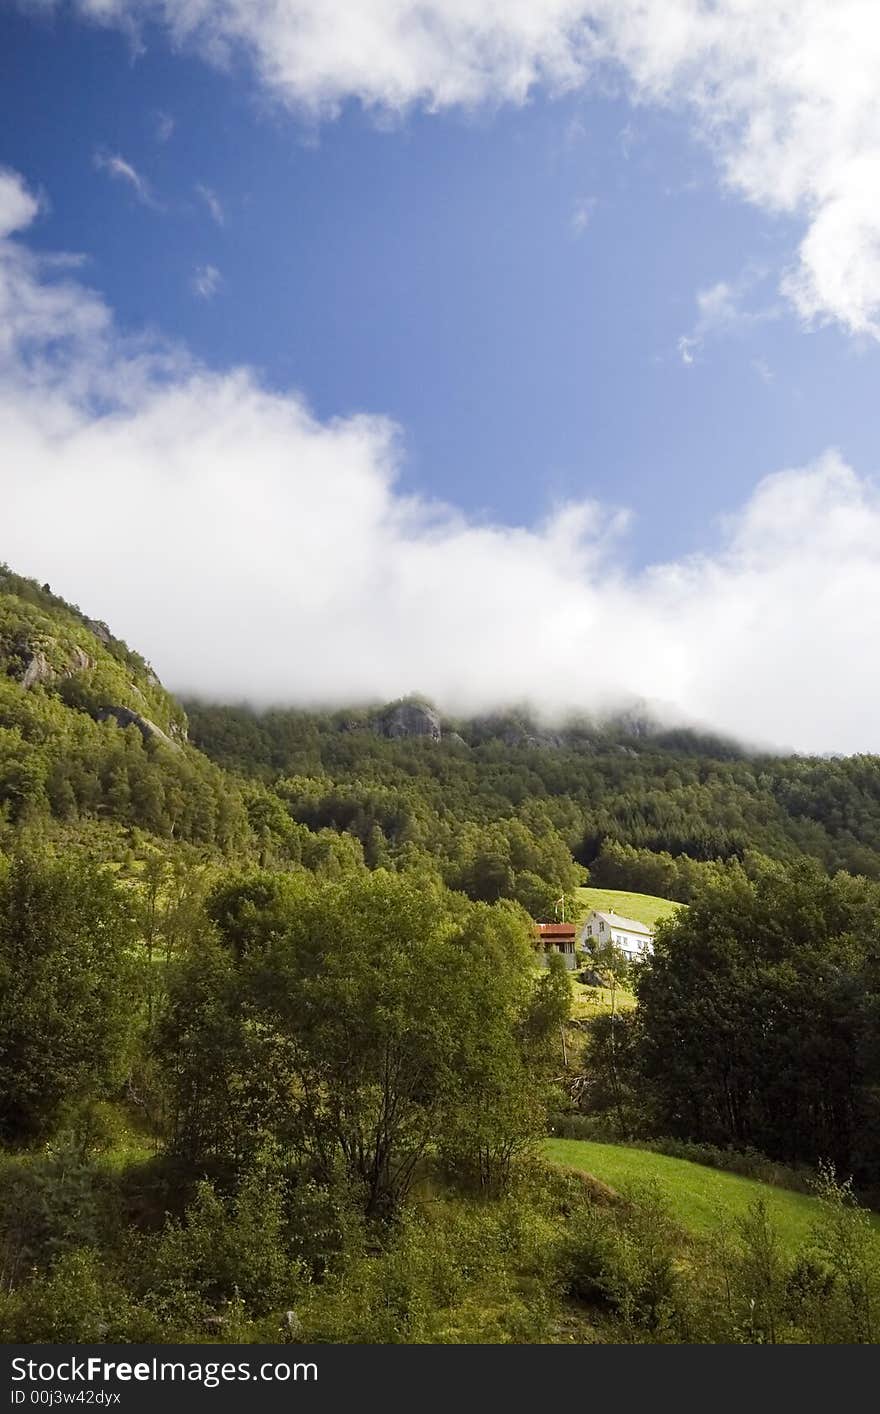 A small white house high up on a hill. Hordaland, Norway.

<a href='http://www.dreamstime.com/beauty-of-norway-rcollection5045-resi208938' STYLE='font-size:13px; text-decoration: blink; color:#FF0000'><b>BEAUTY OF NORWAY COLLECTION »</b></a>. A small white house high up on a hill. Hordaland, Norway.

<a href='http://www.dreamstime.com/beauty-of-norway-rcollection5045-resi208938' STYLE='font-size:13px; text-decoration: blink; color:#FF0000'><b>BEAUTY OF NORWAY COLLECTION »</b></a>